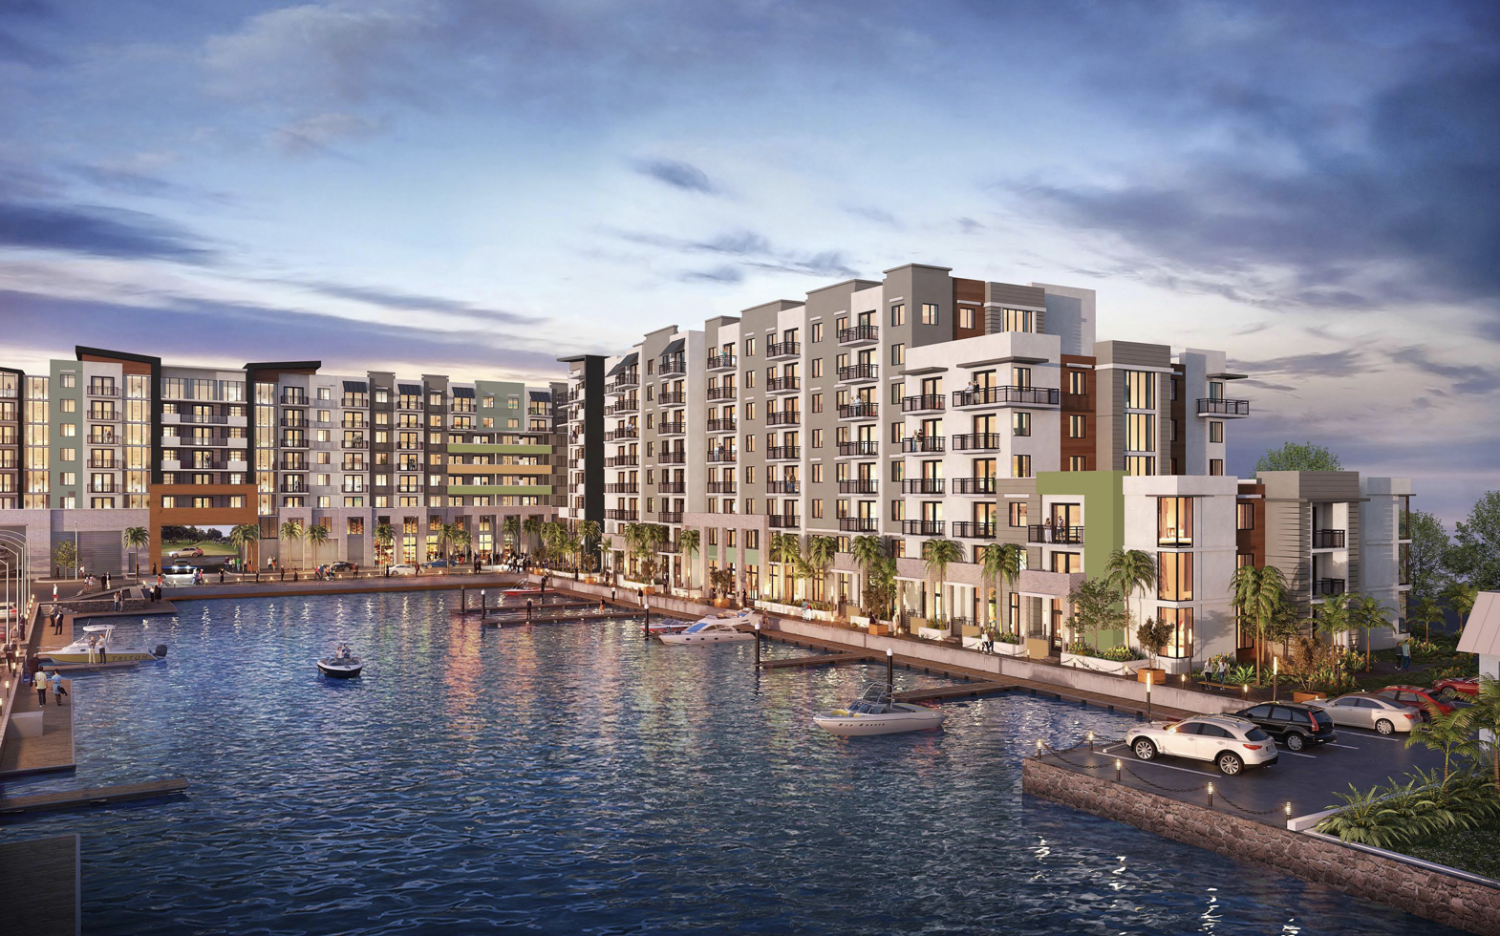 Harborside at Hidden Habour. Designed by MSA Architects.